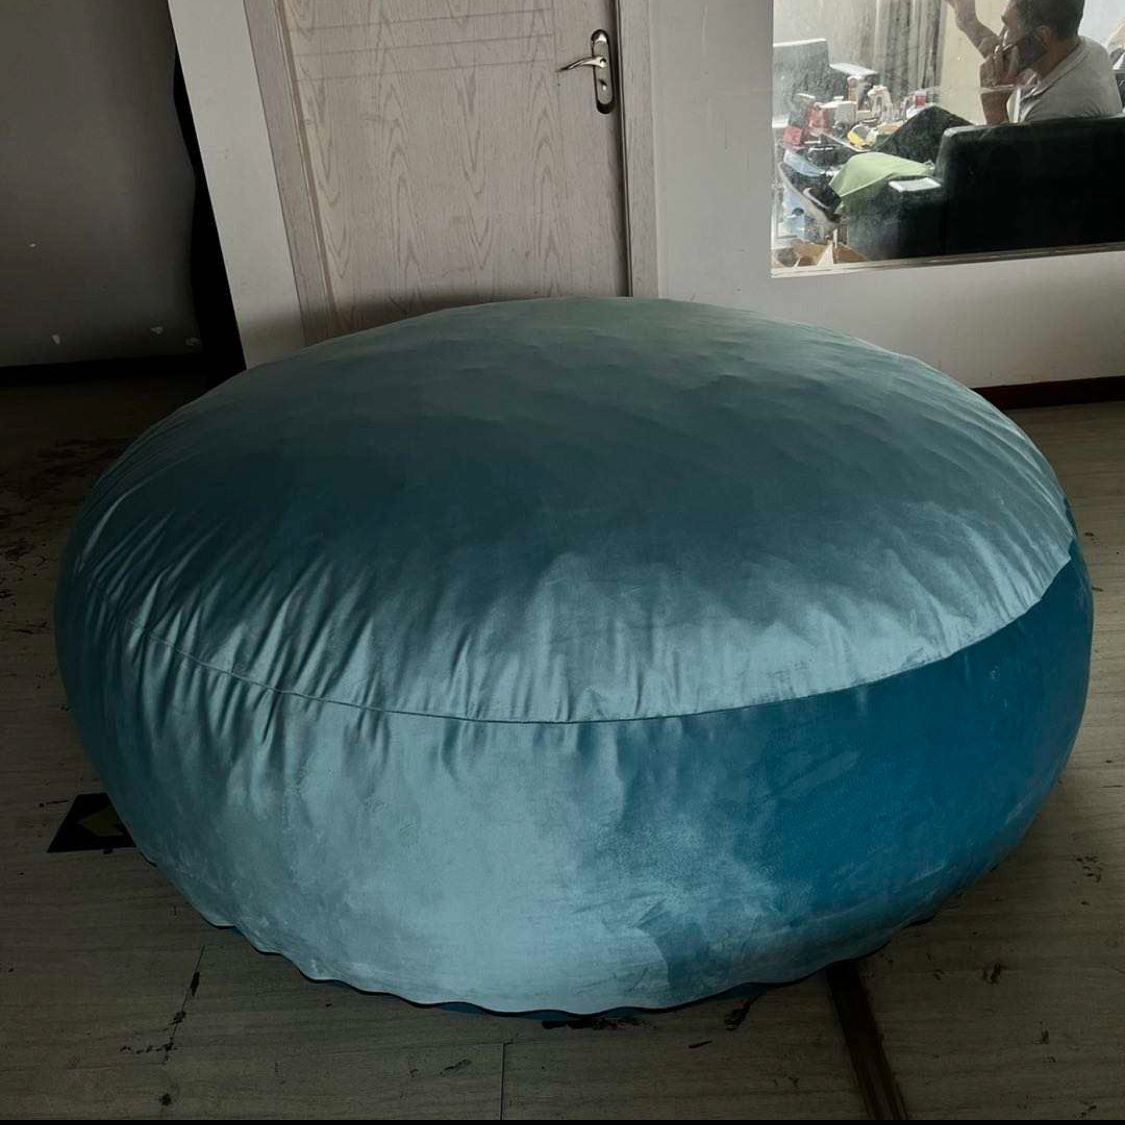 Big Giant Foam Filled Bean Bag For Indoor Loungers and Gamers - Take a nap and Relax.